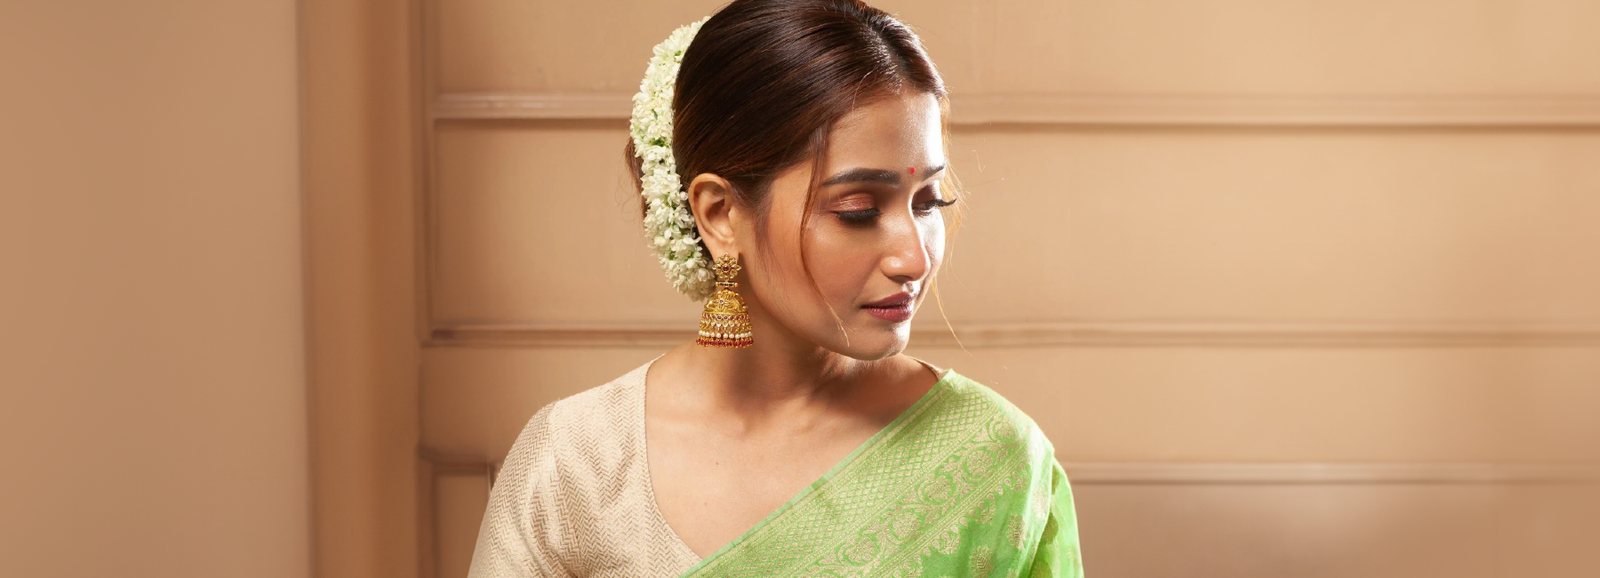 A picture of a woman wearing Indian earrings with a saree.